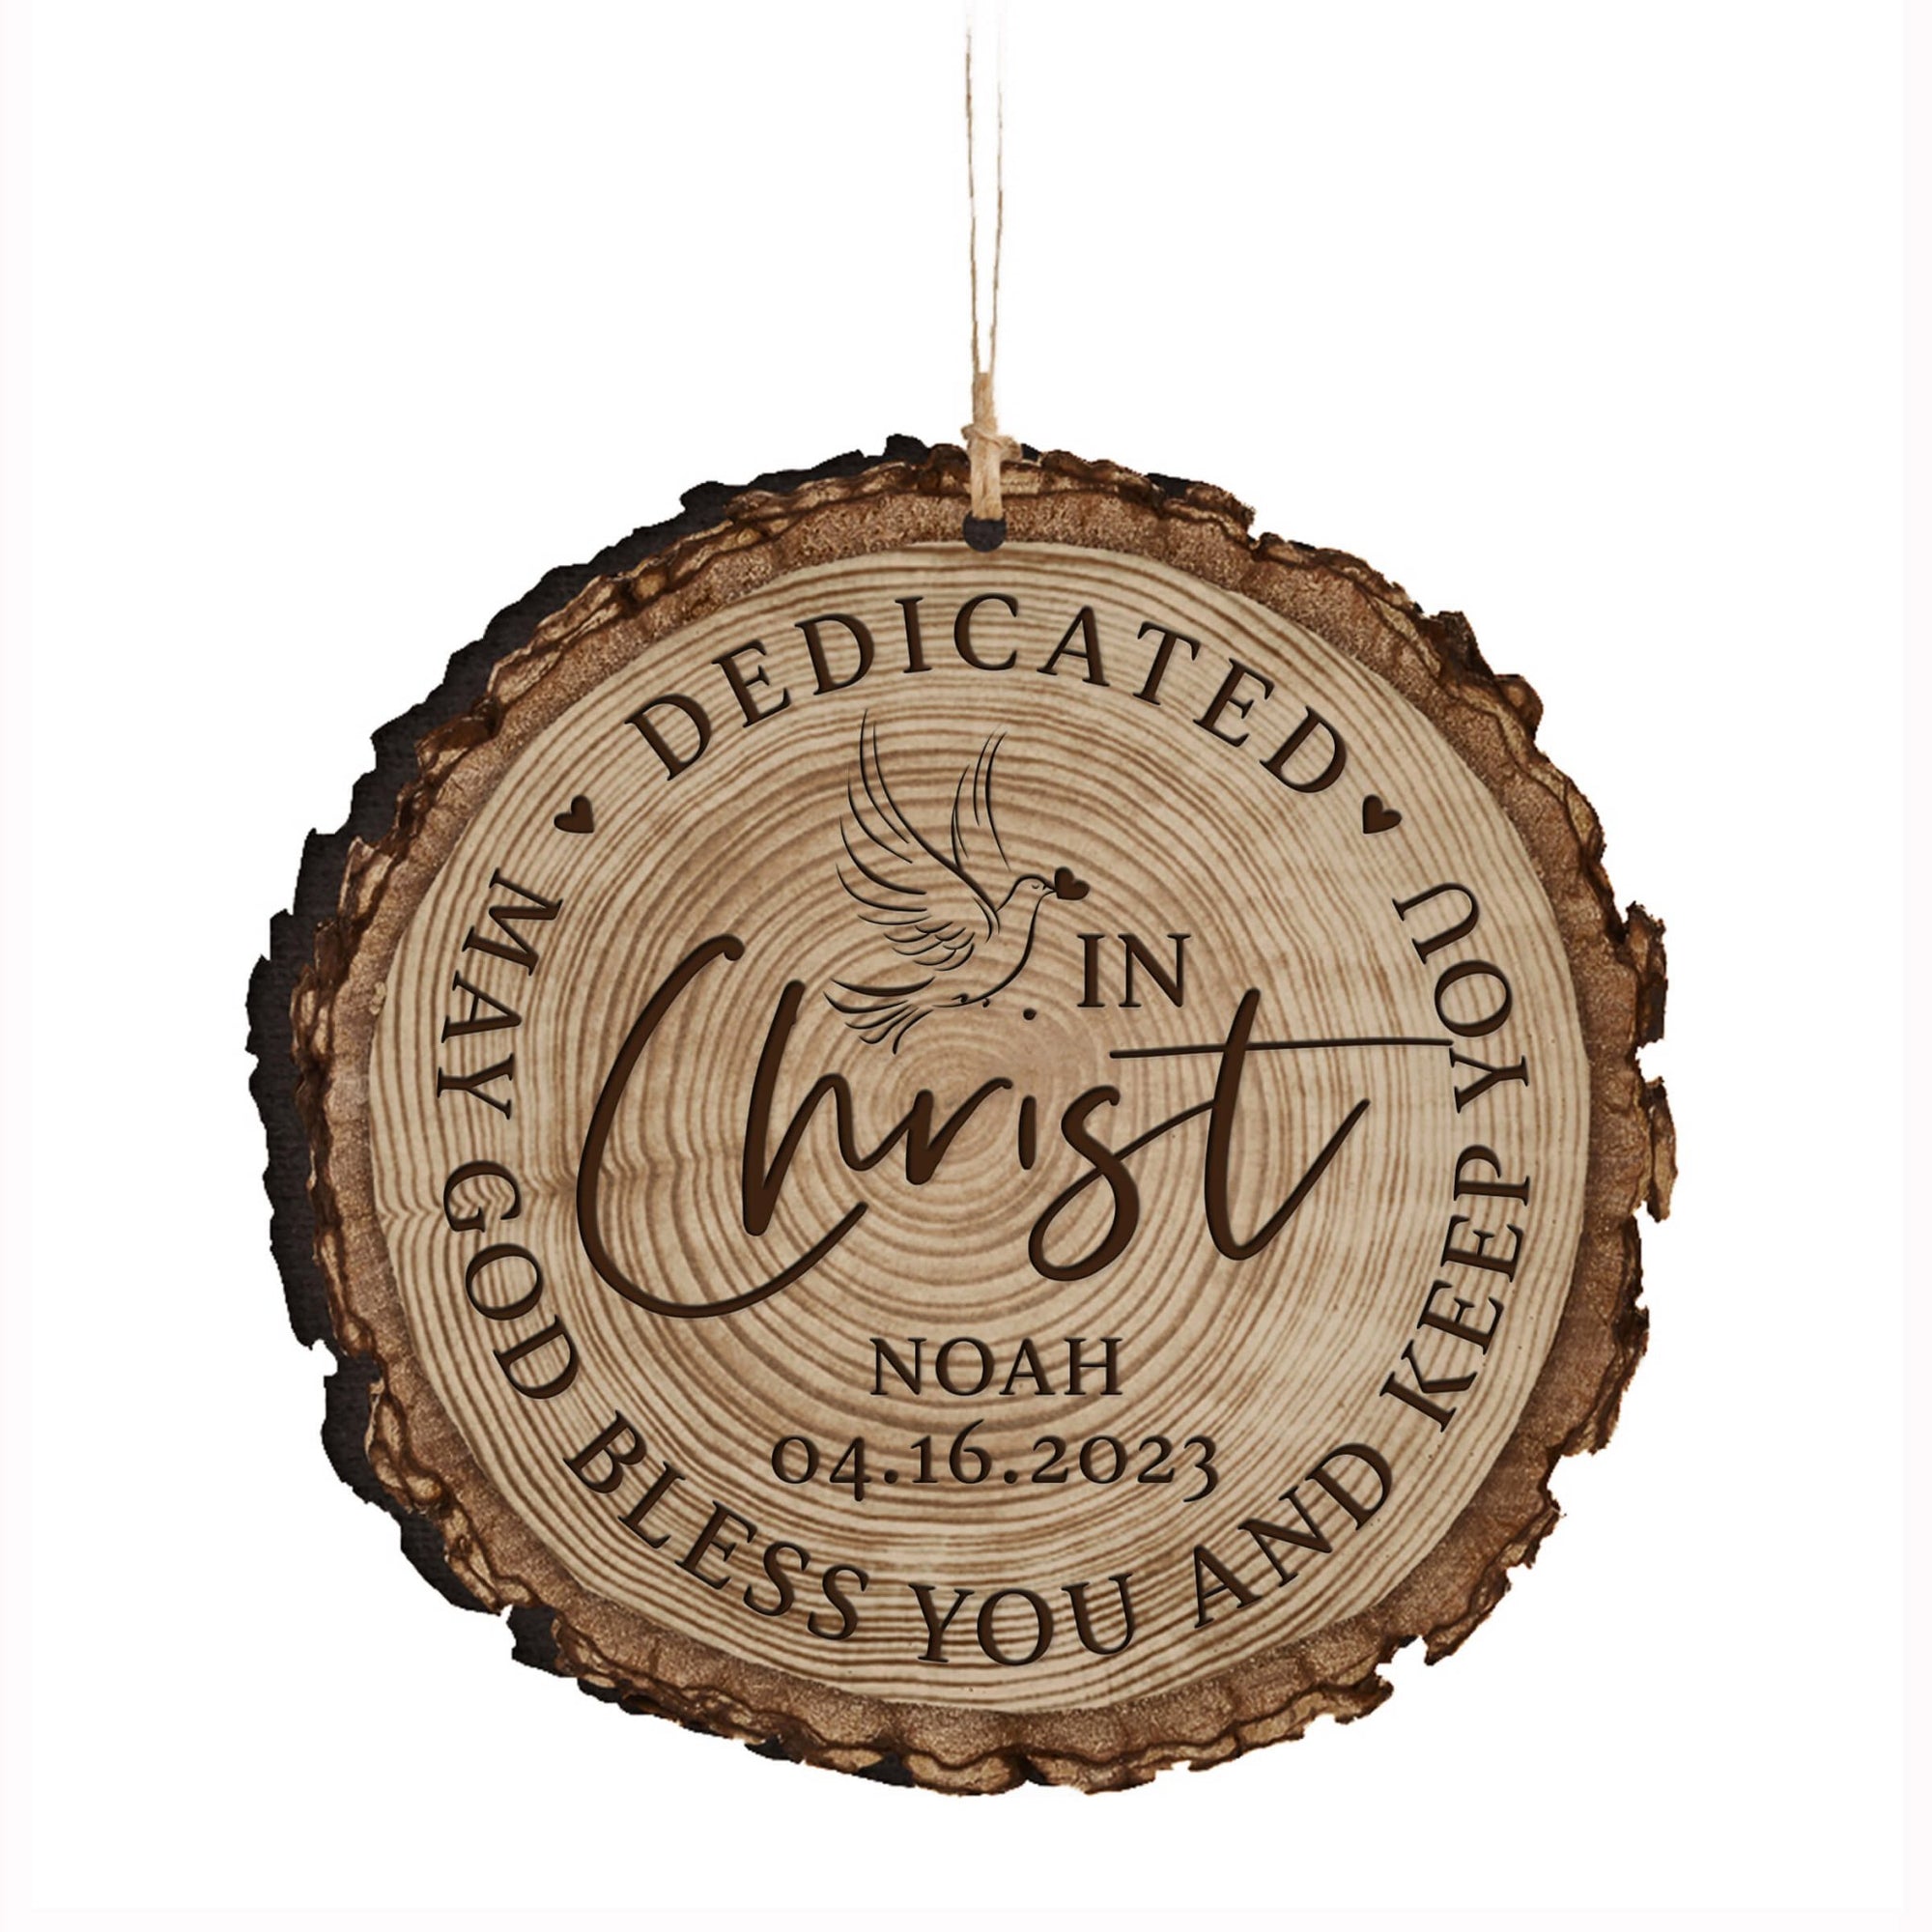 Personalized Wooden Dedication Barky Ornament - Dedicated In Christ - LifeSong Milestones